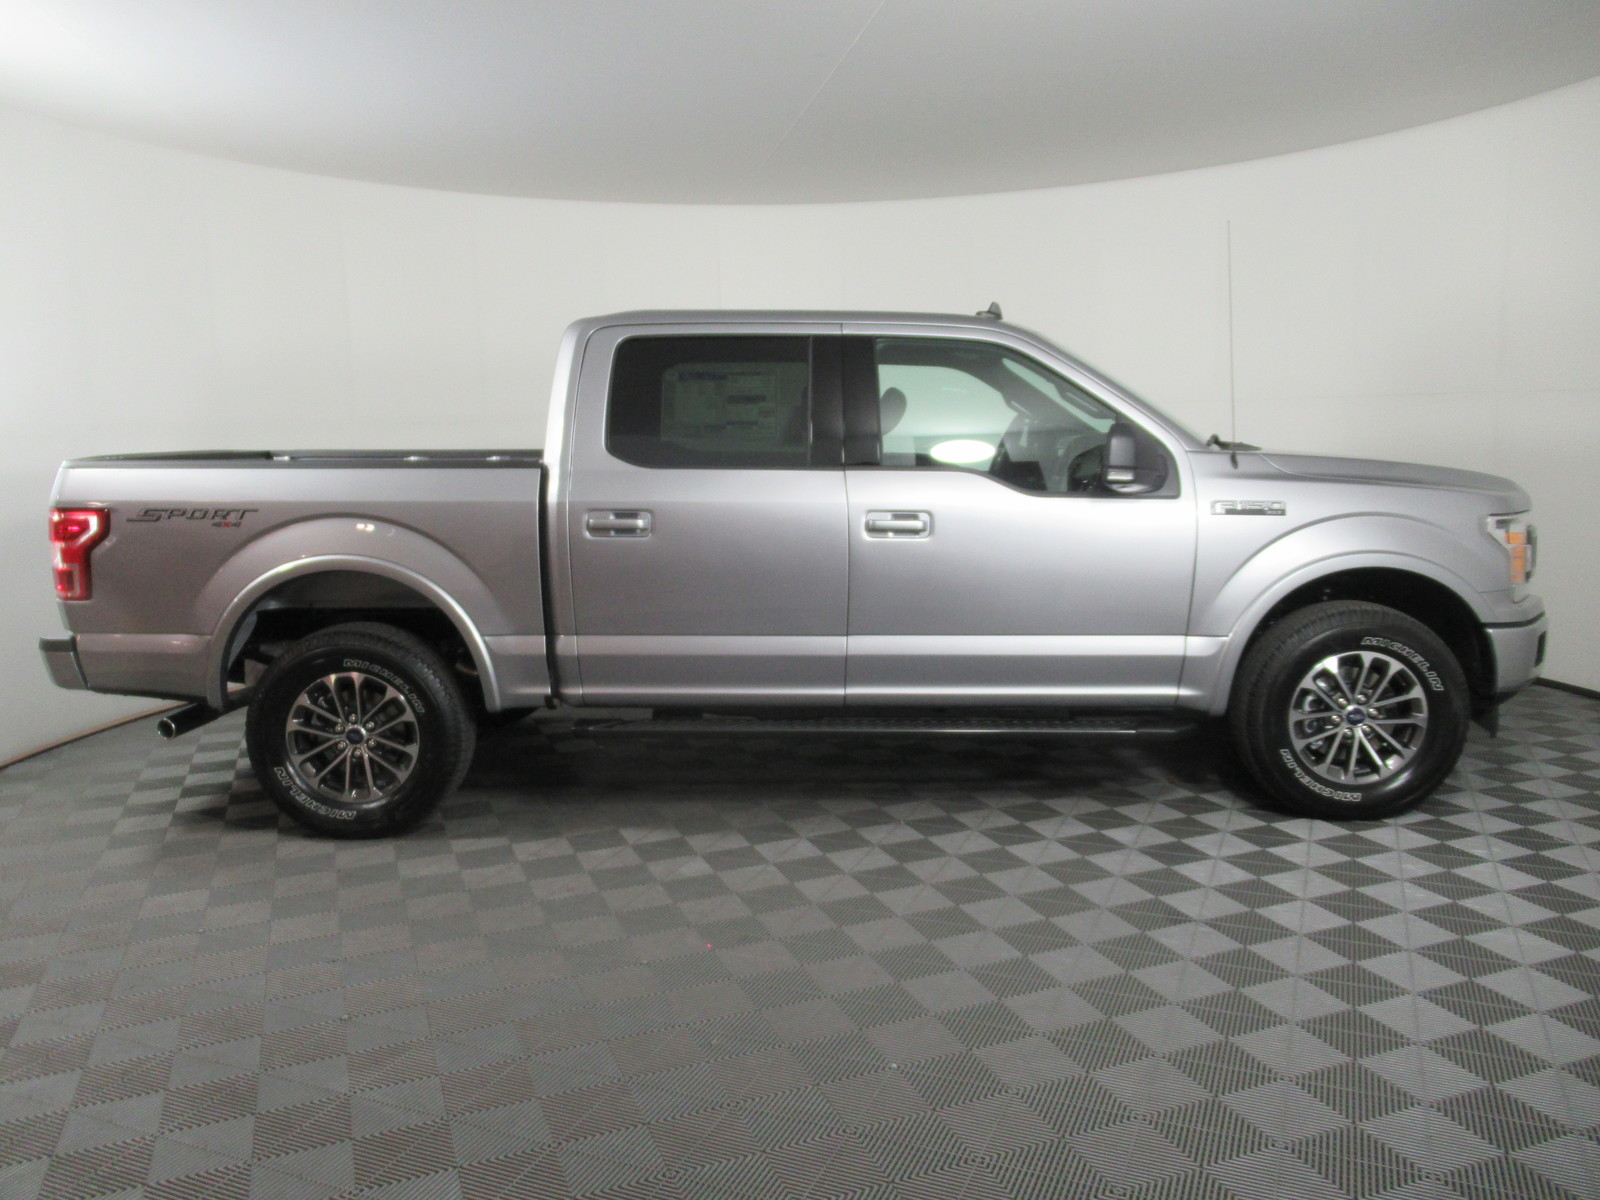 New 2020 Ford F-150 XLT 4WD SuperCrew 5.5' Box Crew Cab Pickup in Savoy 2020 Ford F 150 Xlt 5.0 Towing Capacity